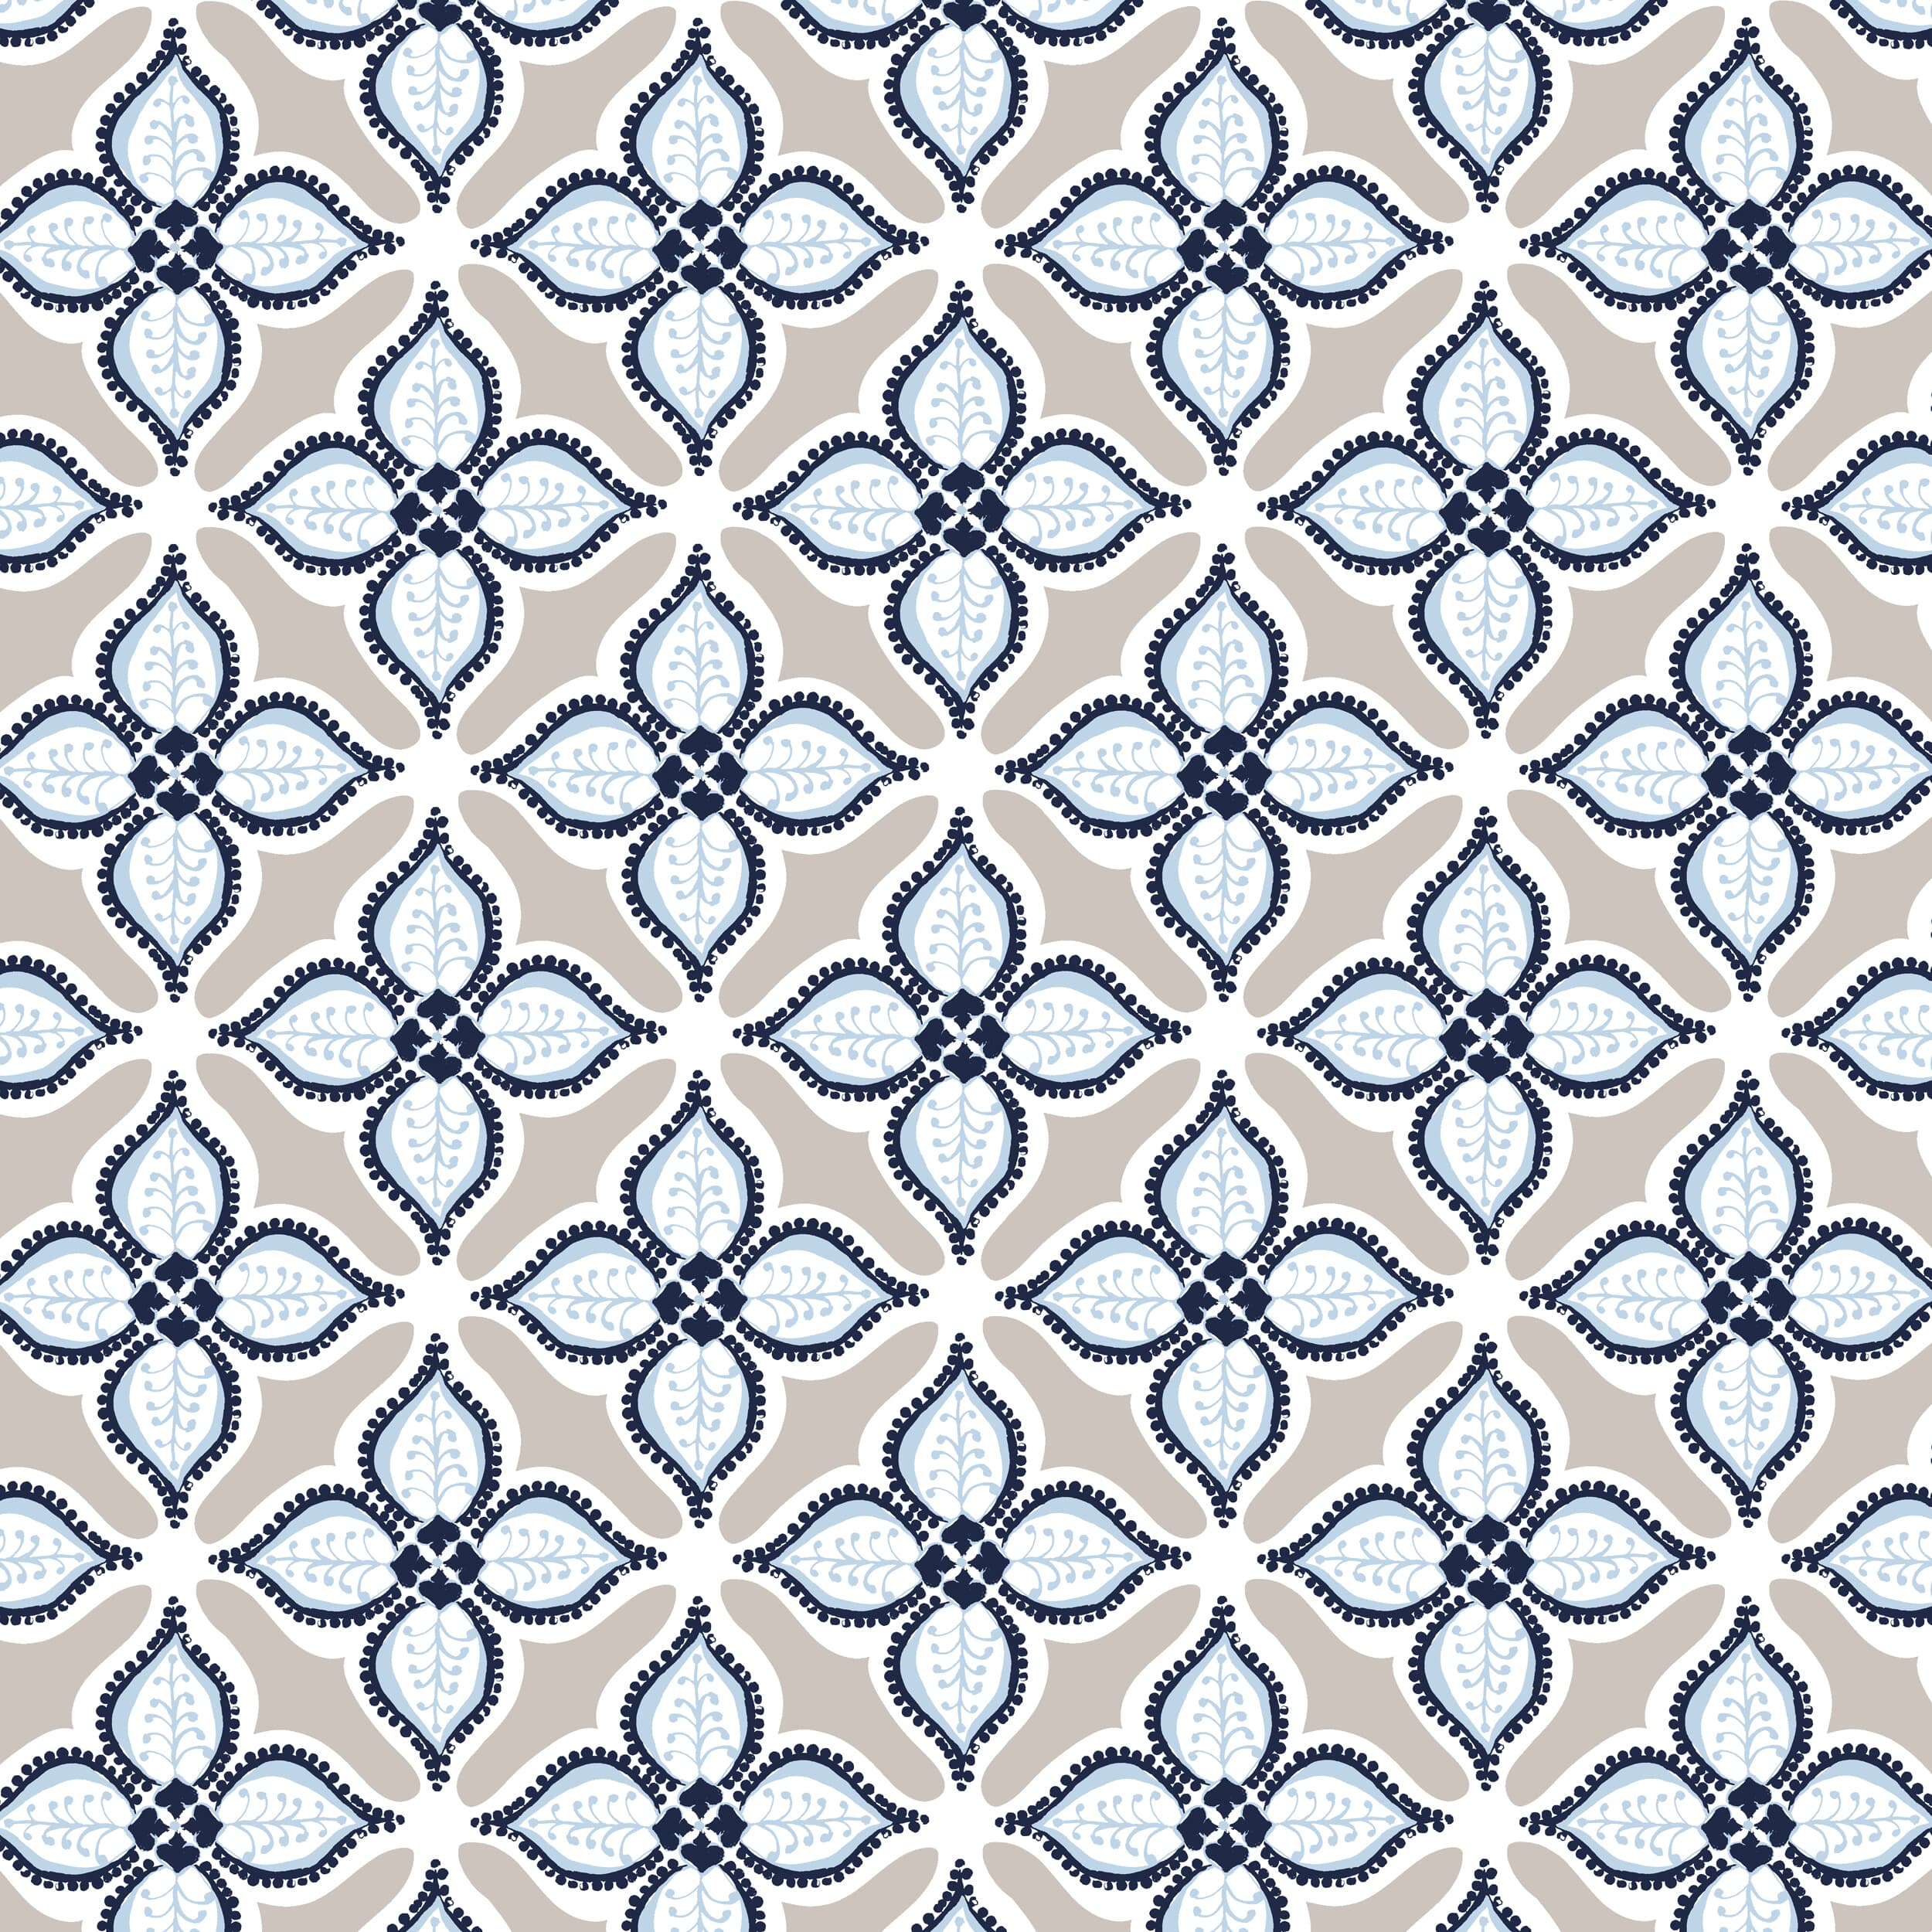 W03vl-4 Glimmer Grey Wallpaper by Stout Fabric